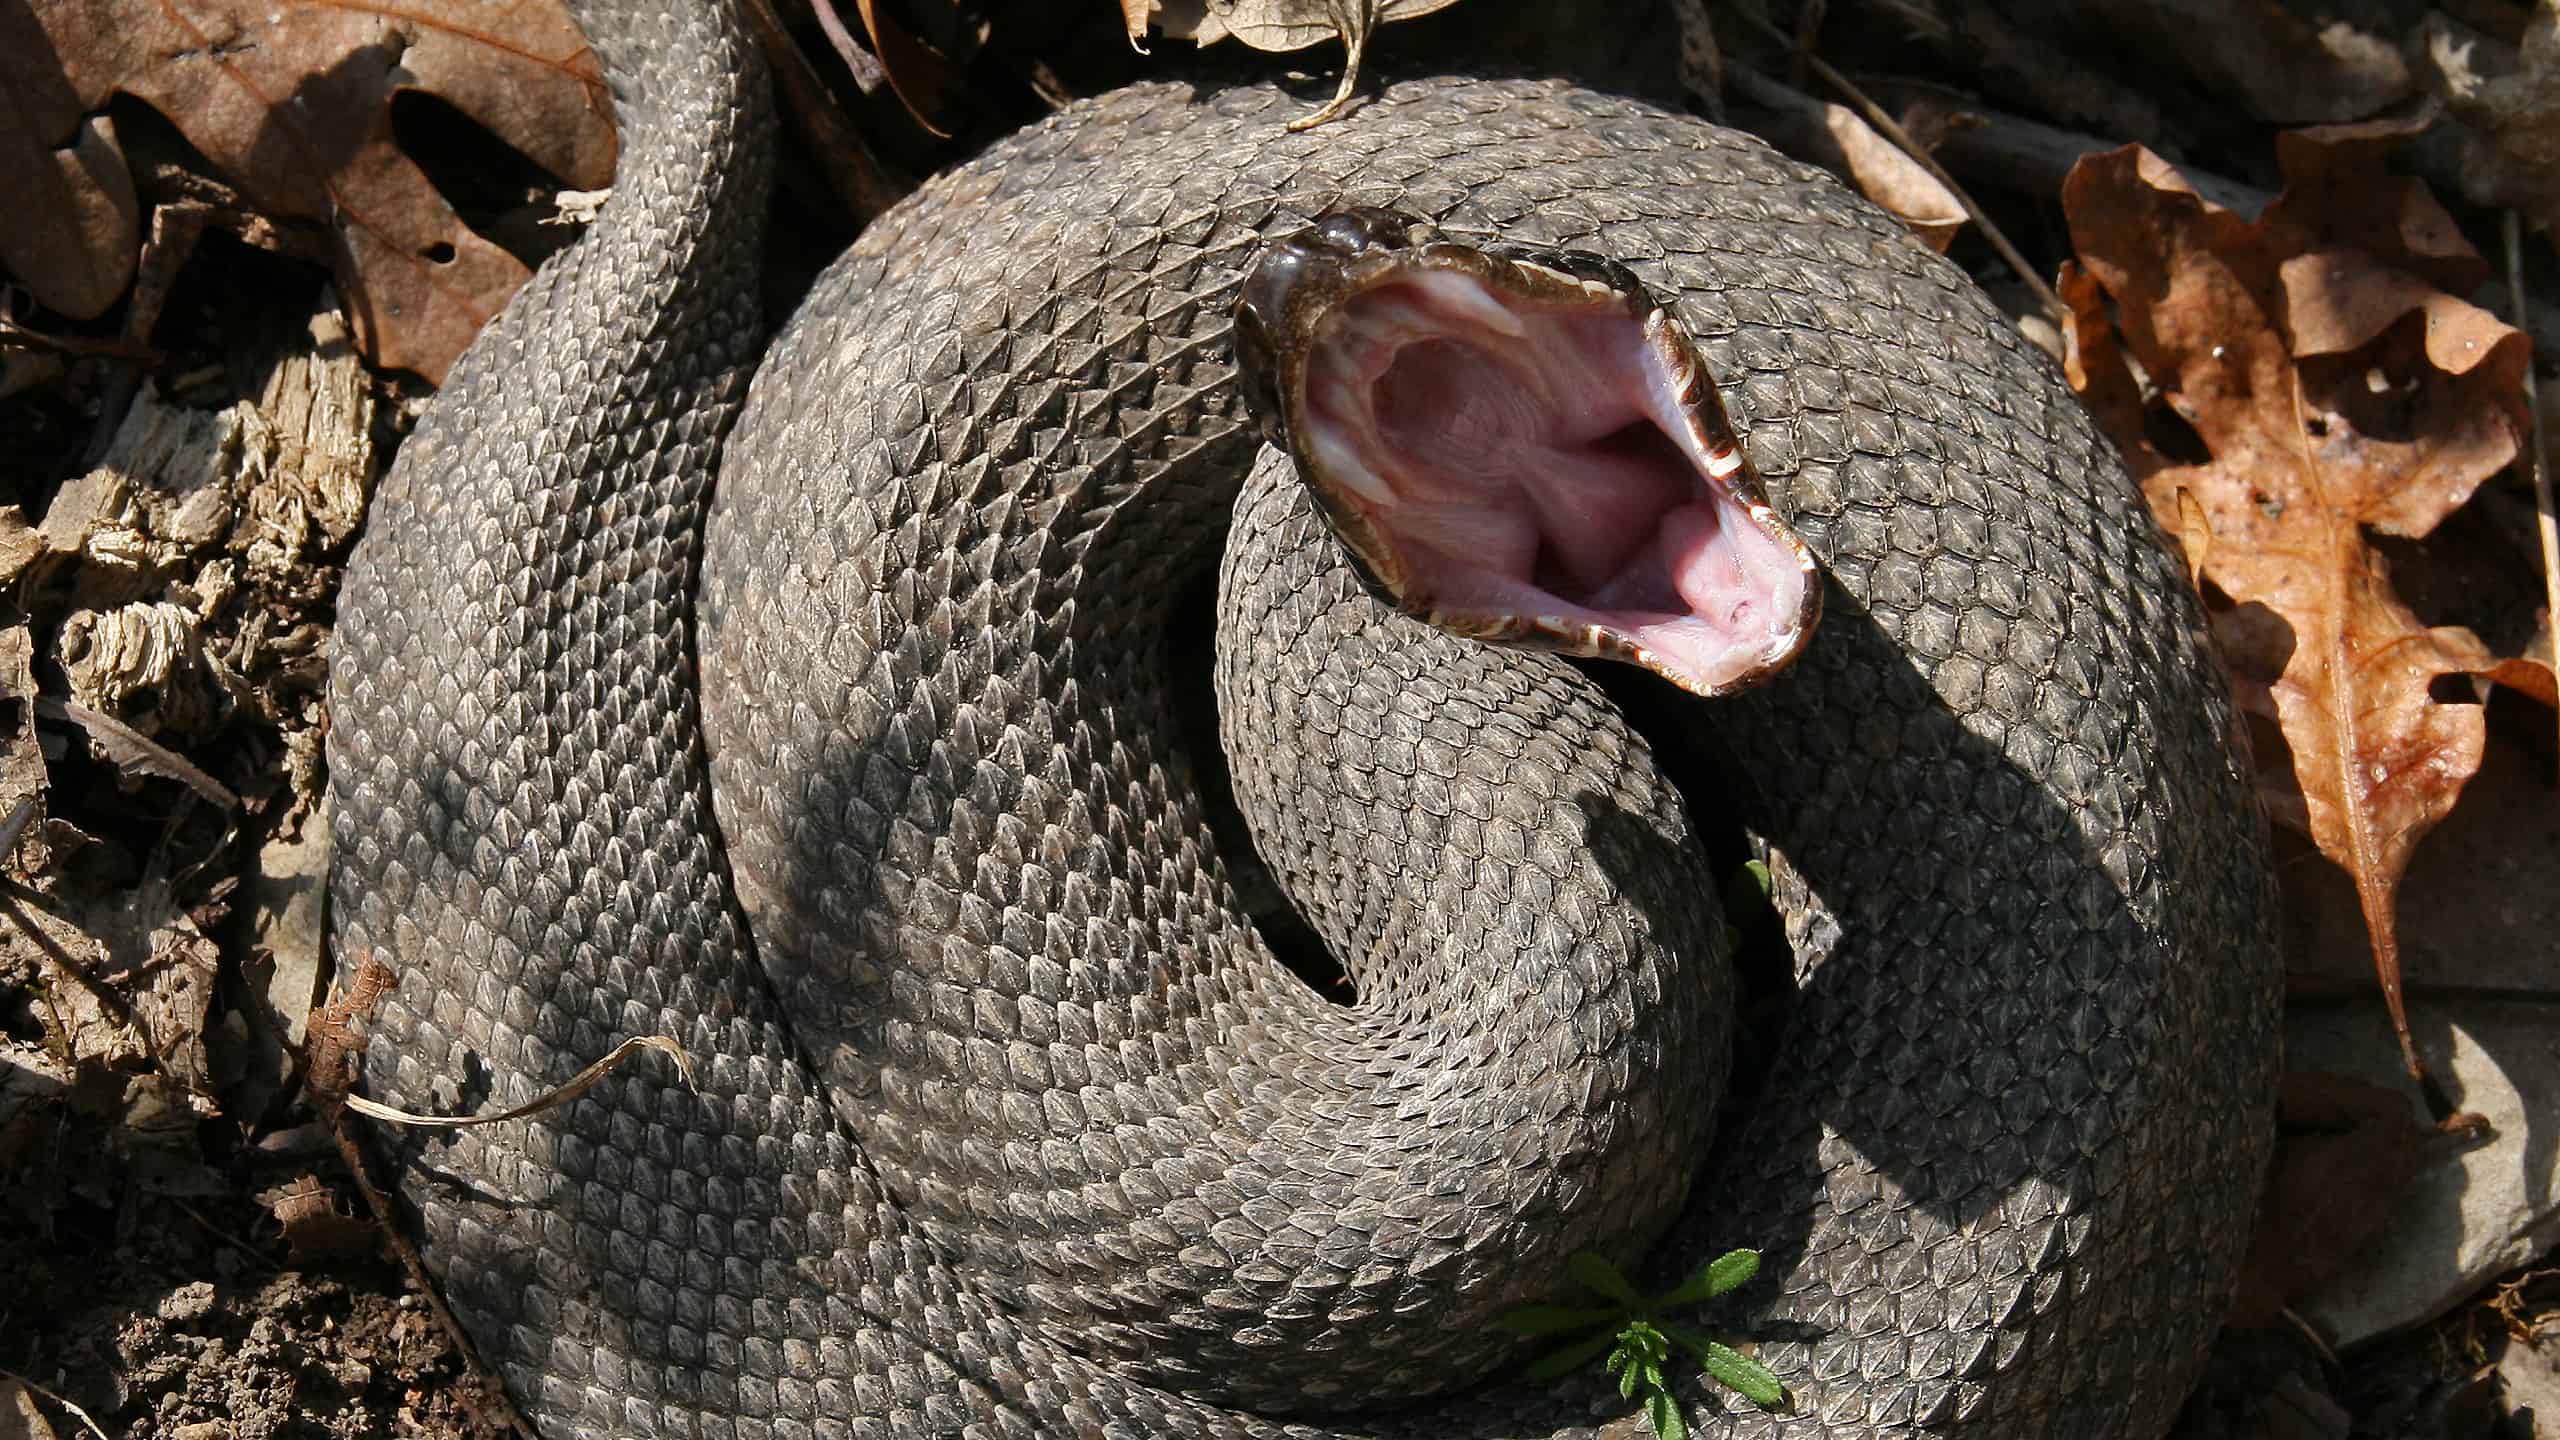 Western cottonmouth snake isolated